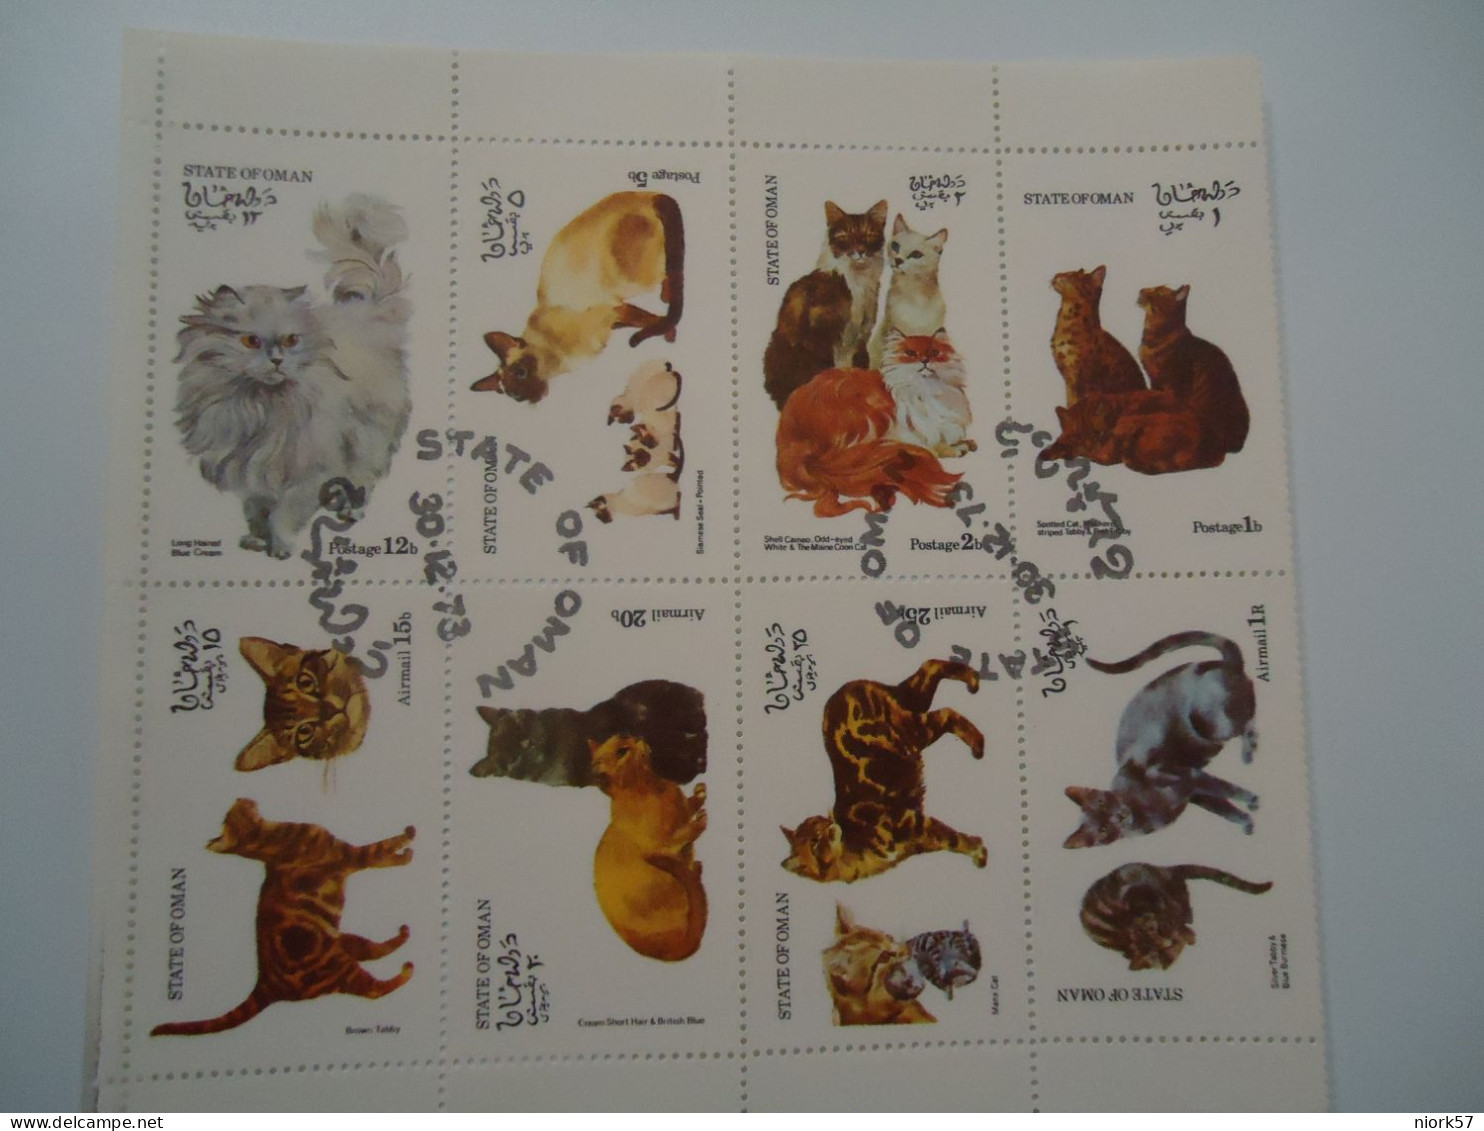 OMAN STATE  USED    SHEET  CAT CATS 1973 - Chats Domestiques